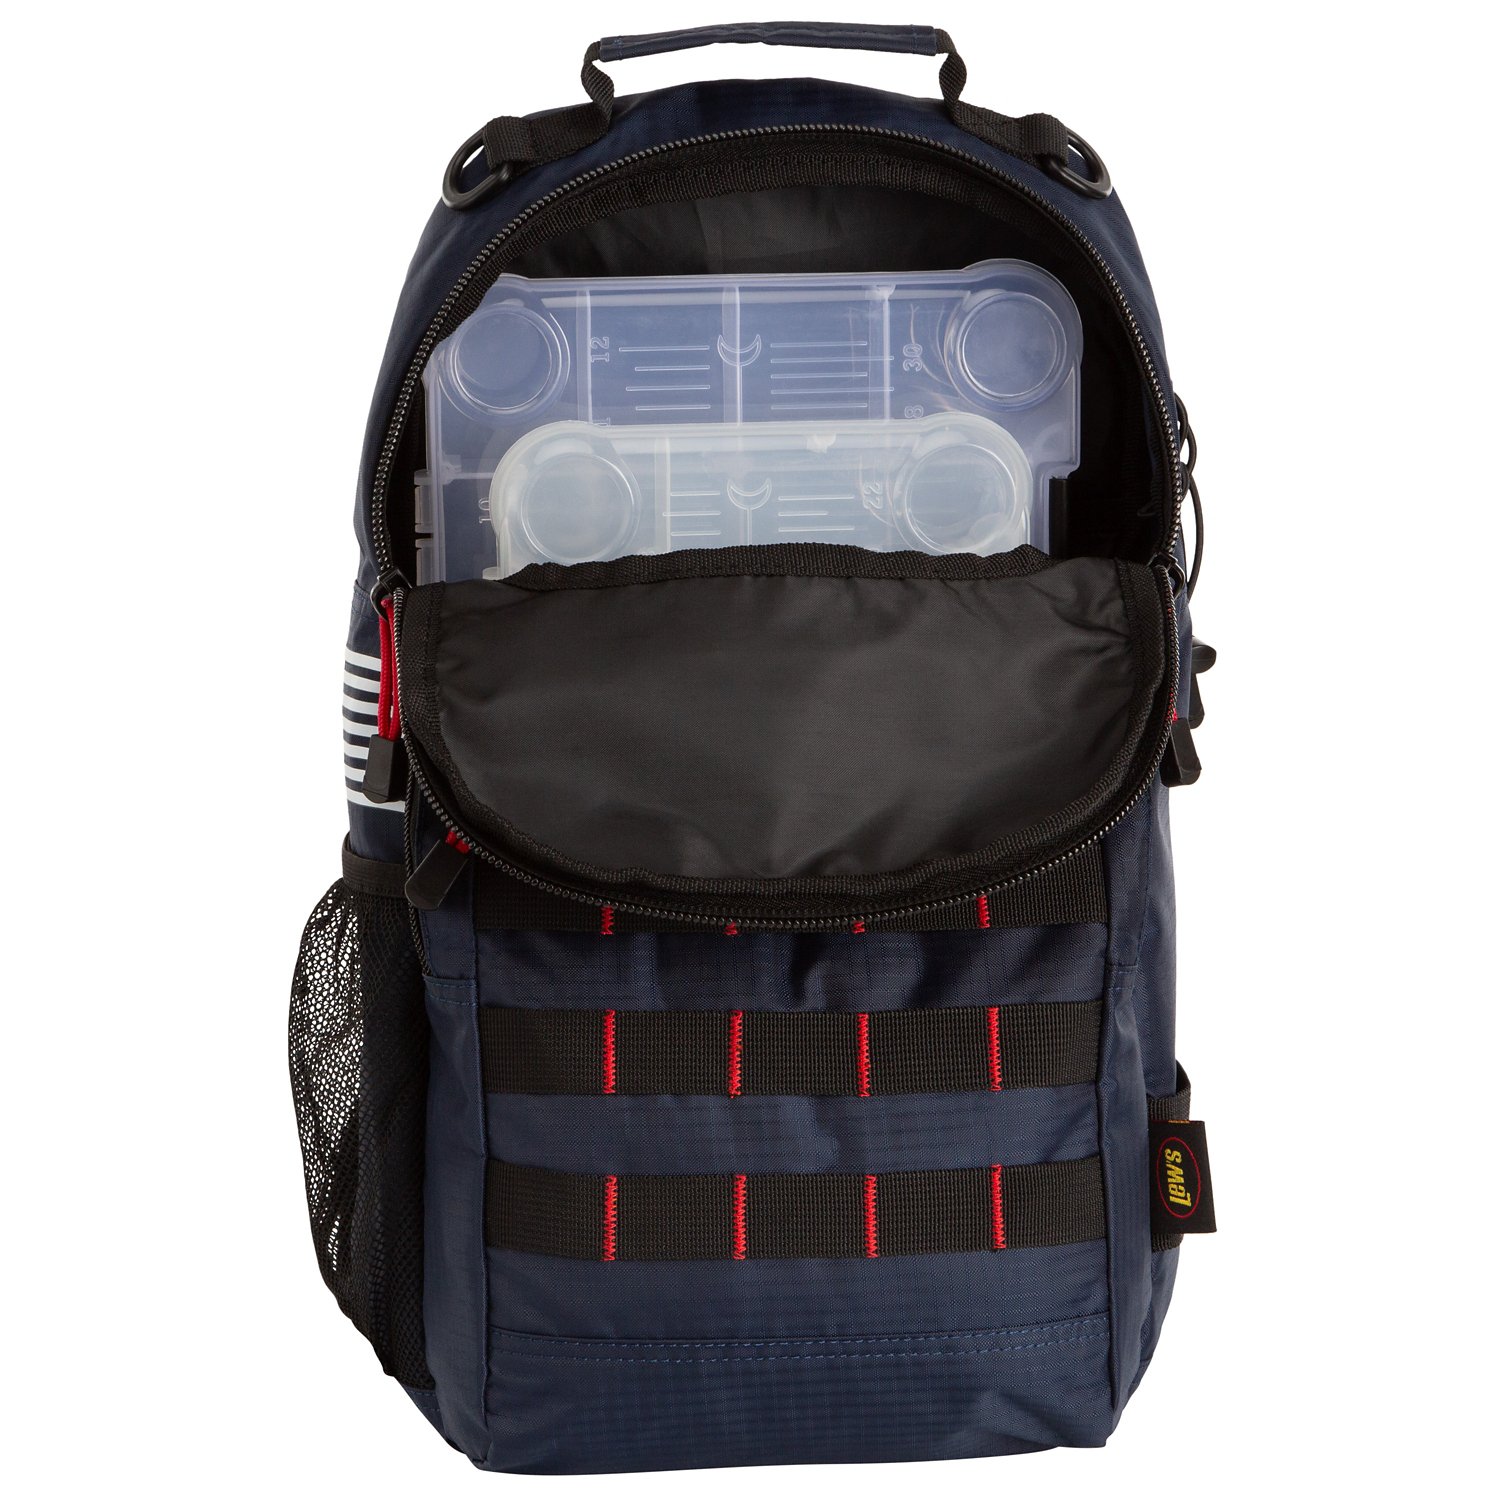 Lew's American Hero 3600 Tackle Sling Pack Overview 